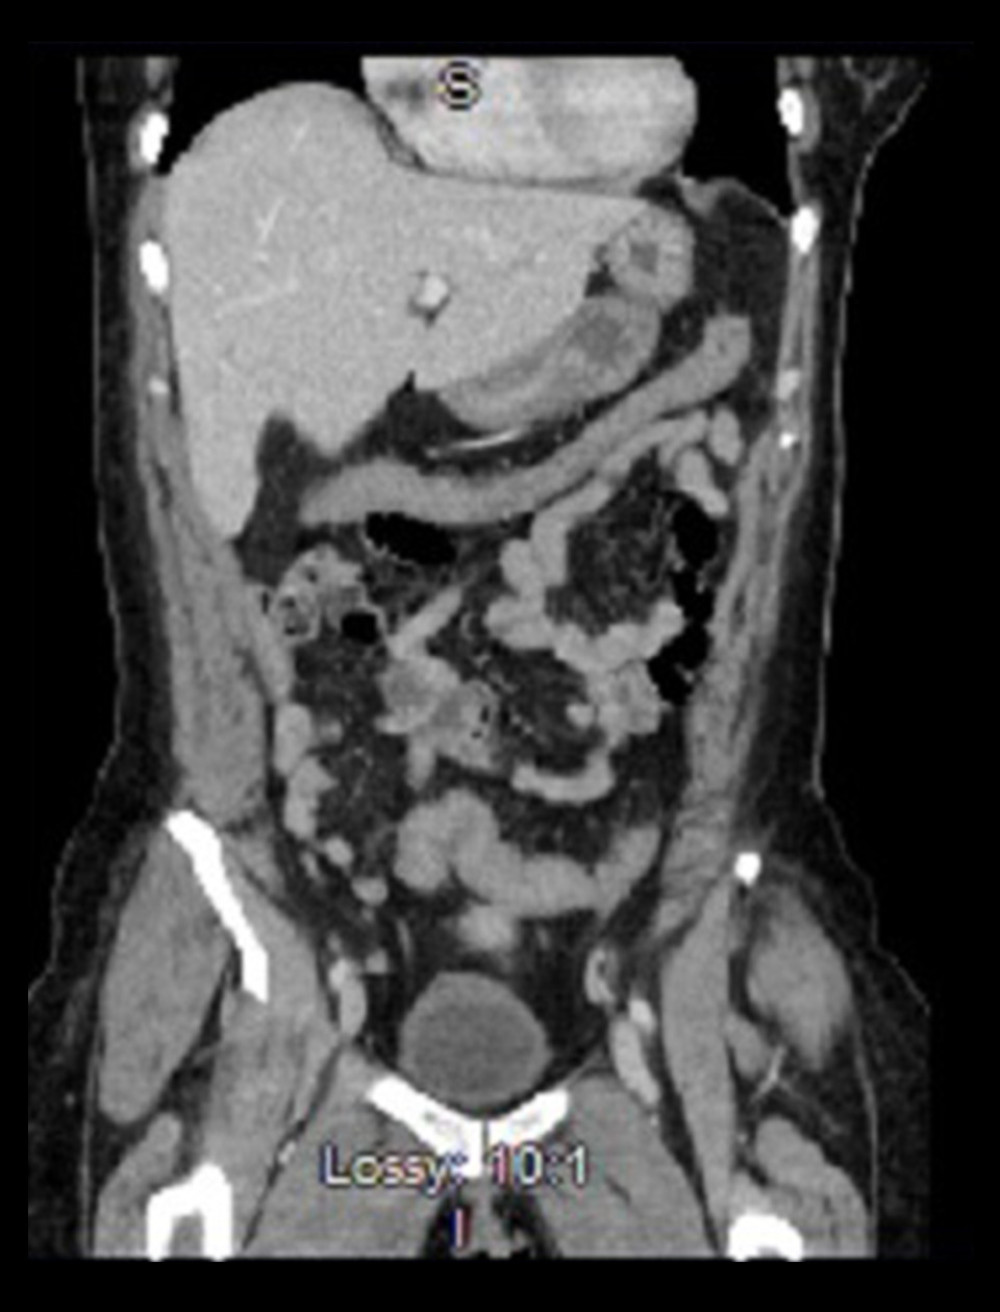 CT scan A/P on first admission, showing diffuse circumferential colonic wall thickening. The entire colon shows some questionable minimal peri-colonic hazy inflammation and thus the appearance of diffuse colitis.